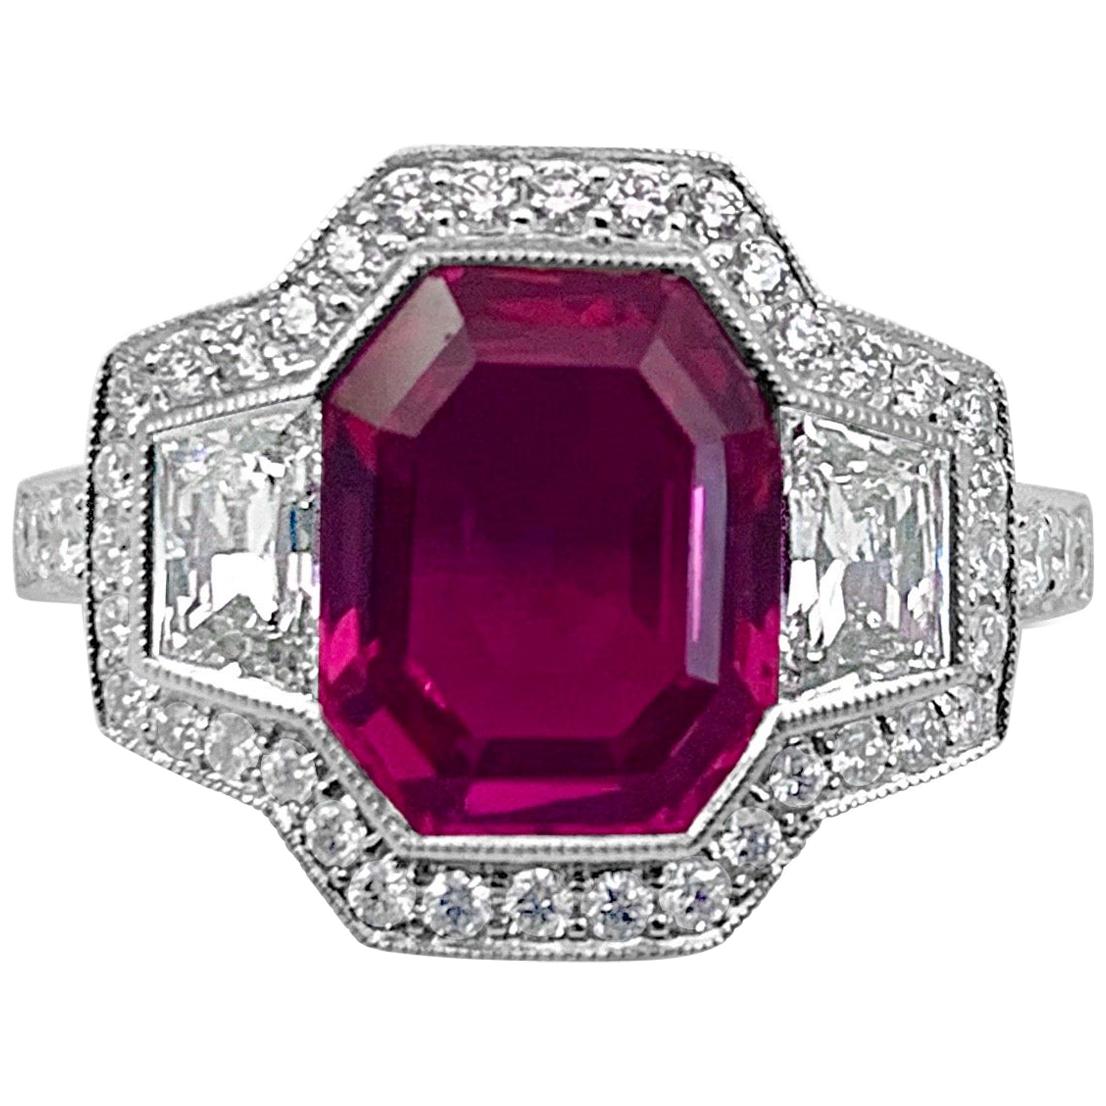 An extremely rare and fine quality 3.40 carat pink sapphire, The Audrey is a true collectors gem. An intense purplish pink sapphire is set in an elegant art deco style ring made in 18K white gold.

Ruby Details 
Shape	Rectangular,